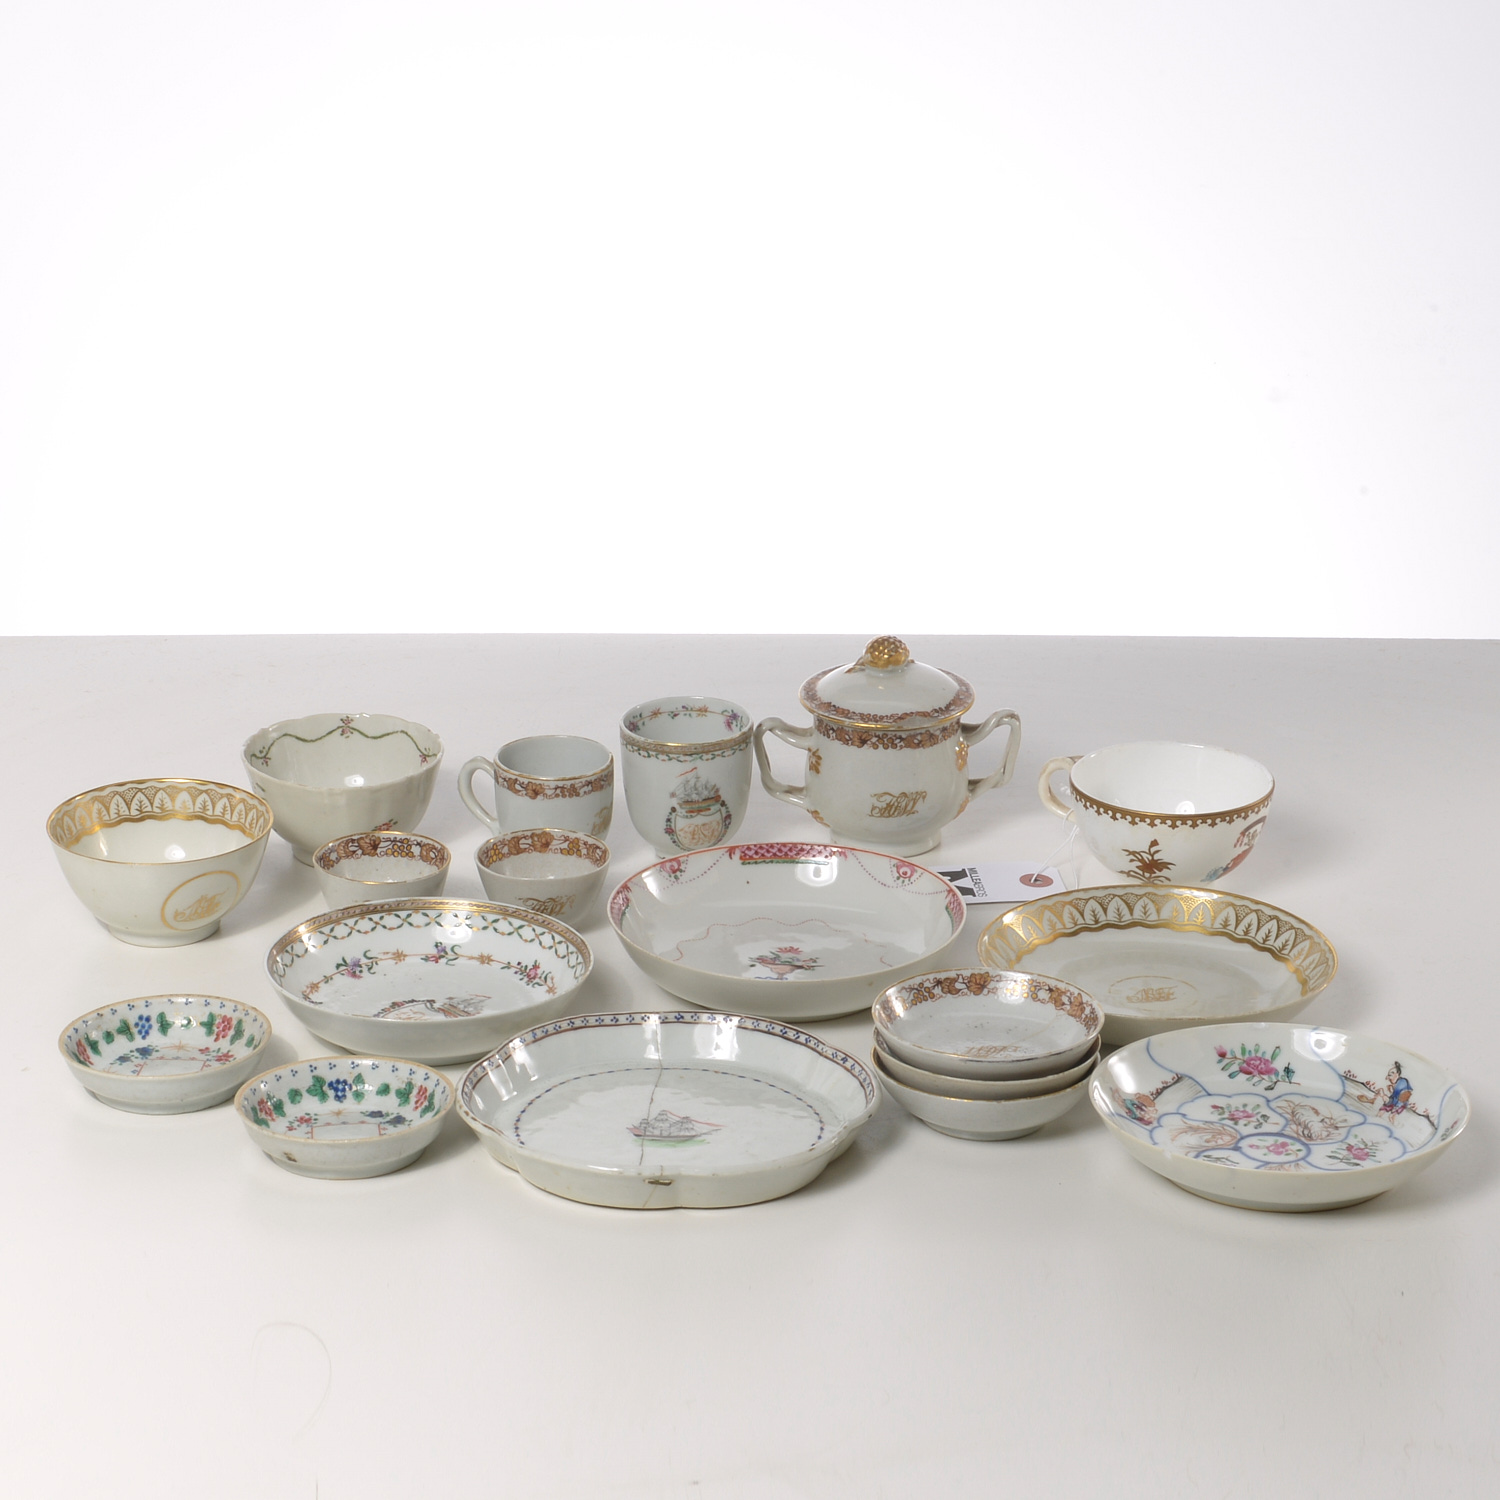 COLLECTION CHINESE EXPORT PORCELAINS 2cee1e